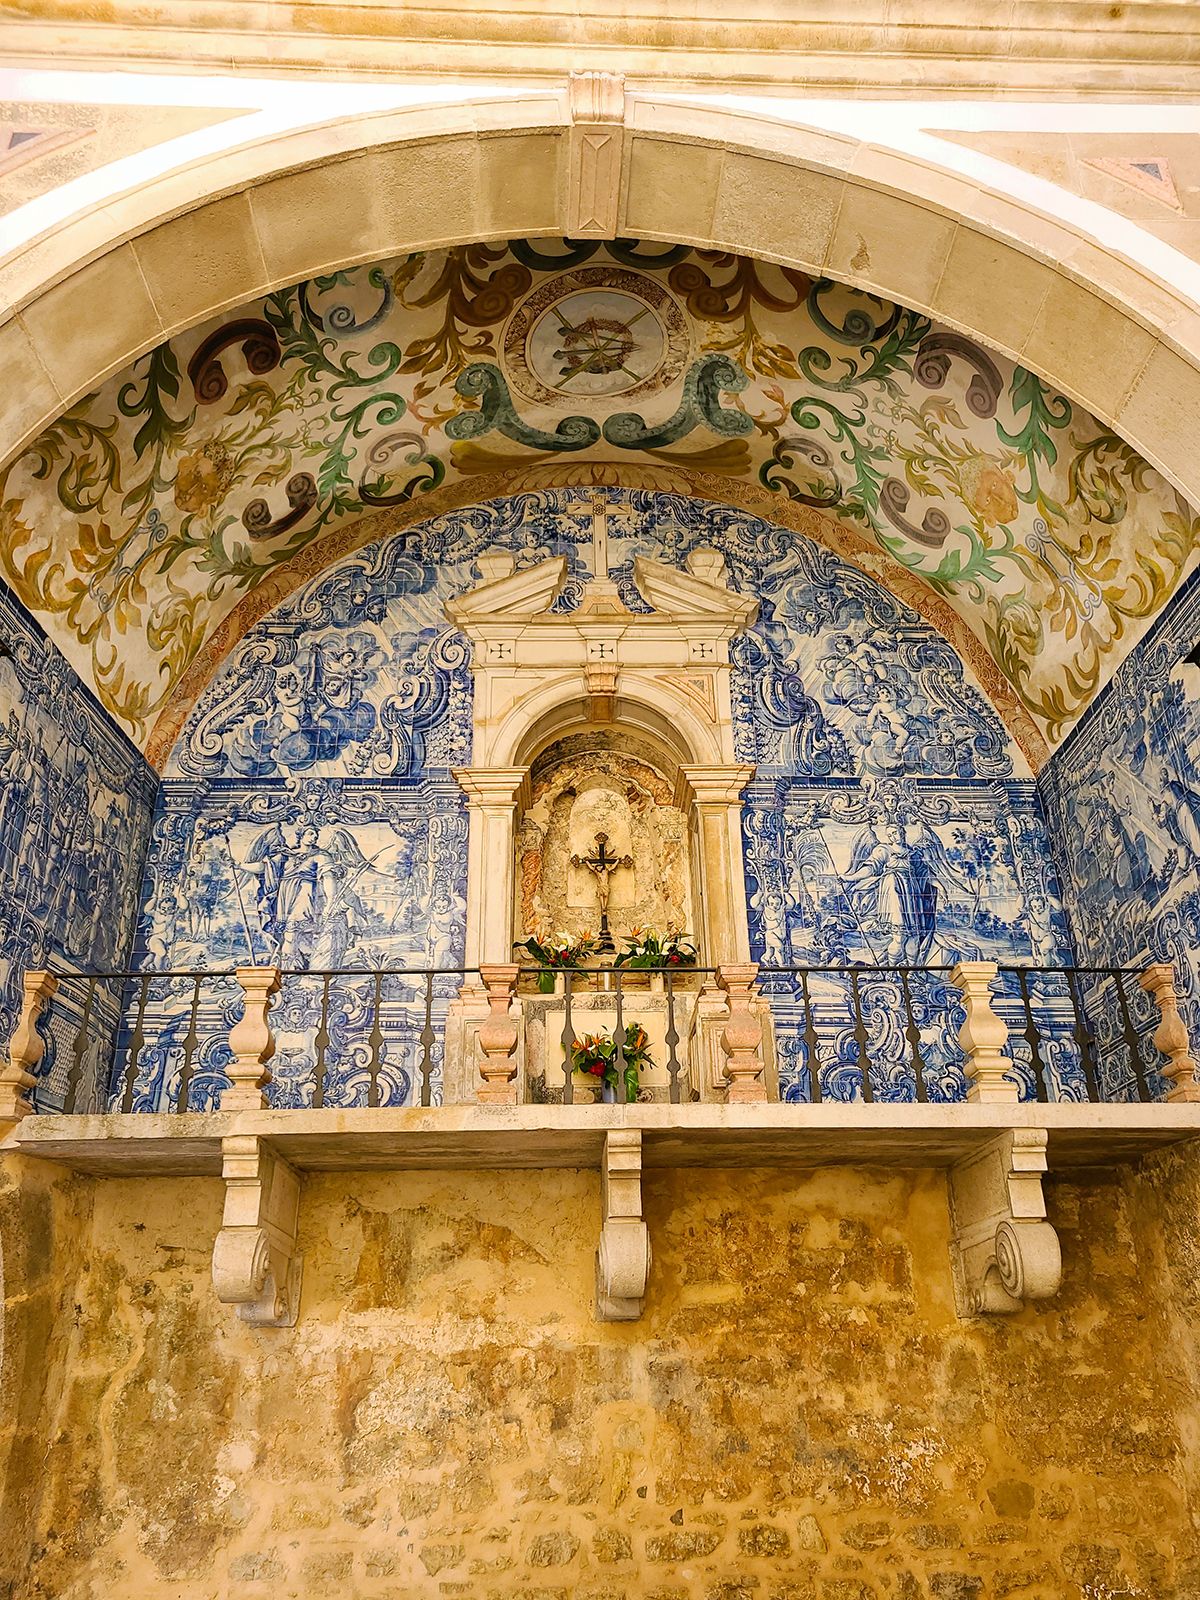 #1A. Insert AFTER....Paragraph 1 After...azulejo tiles depicting biblical scenes. NOTE.... VERTICAL PHOTO. Place UPRIGHT.